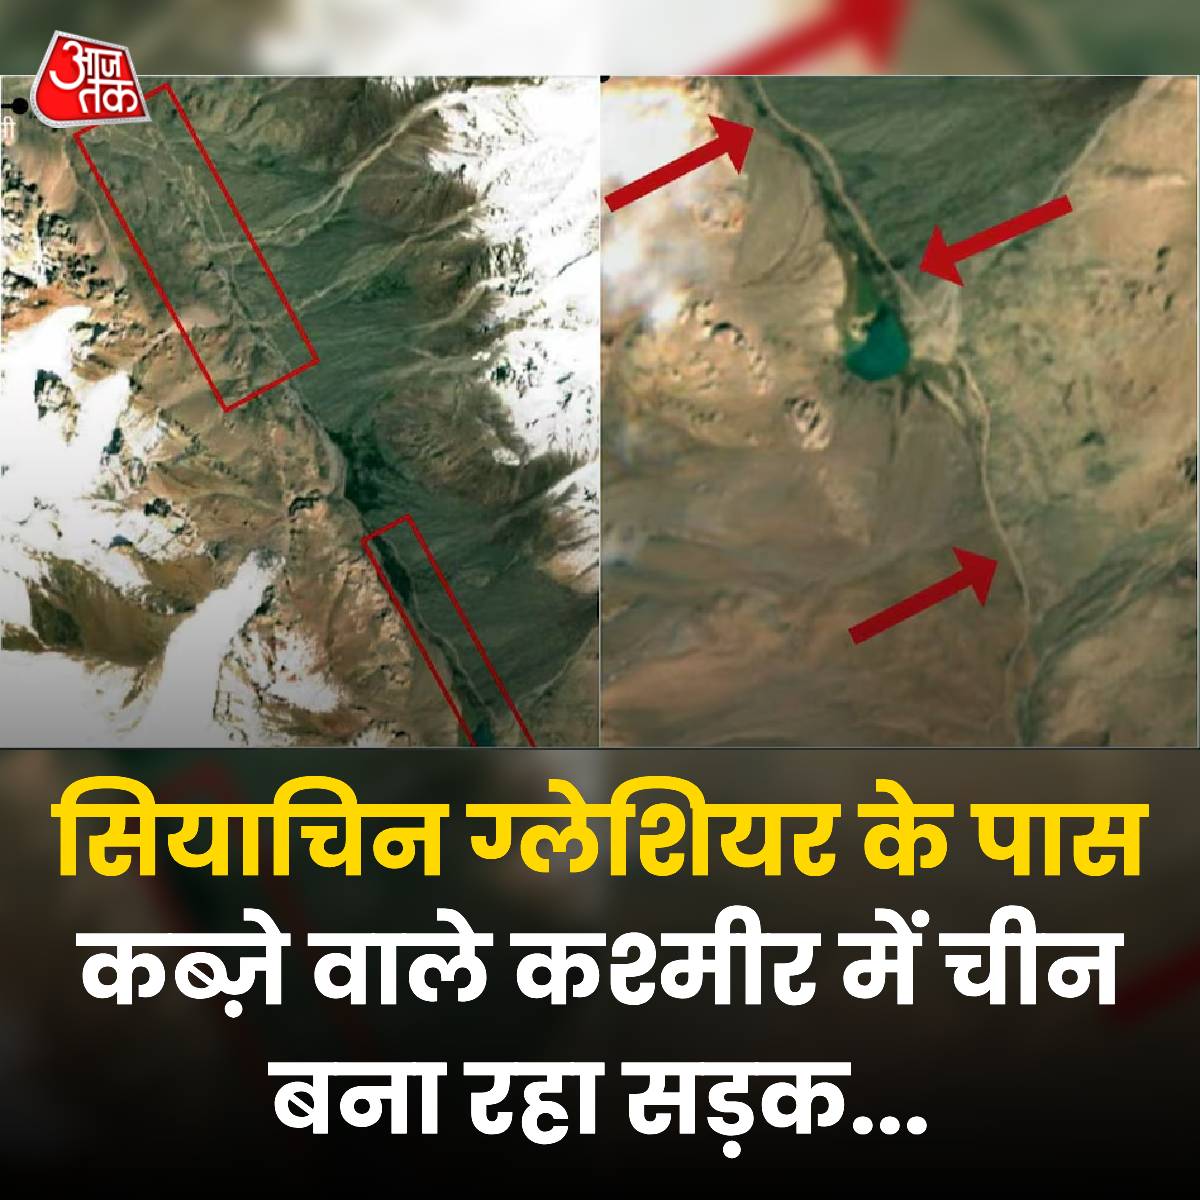 Indira Gandhi convinced Mr. manekshaw and went ahead and broke Pakistan into two and formed Bangladesh. 10 years and Narendra Modi govt could not take back Pakistan occupied Kashmir and now reports of China making roads there close to Siachin are alarming. BJP should stop…